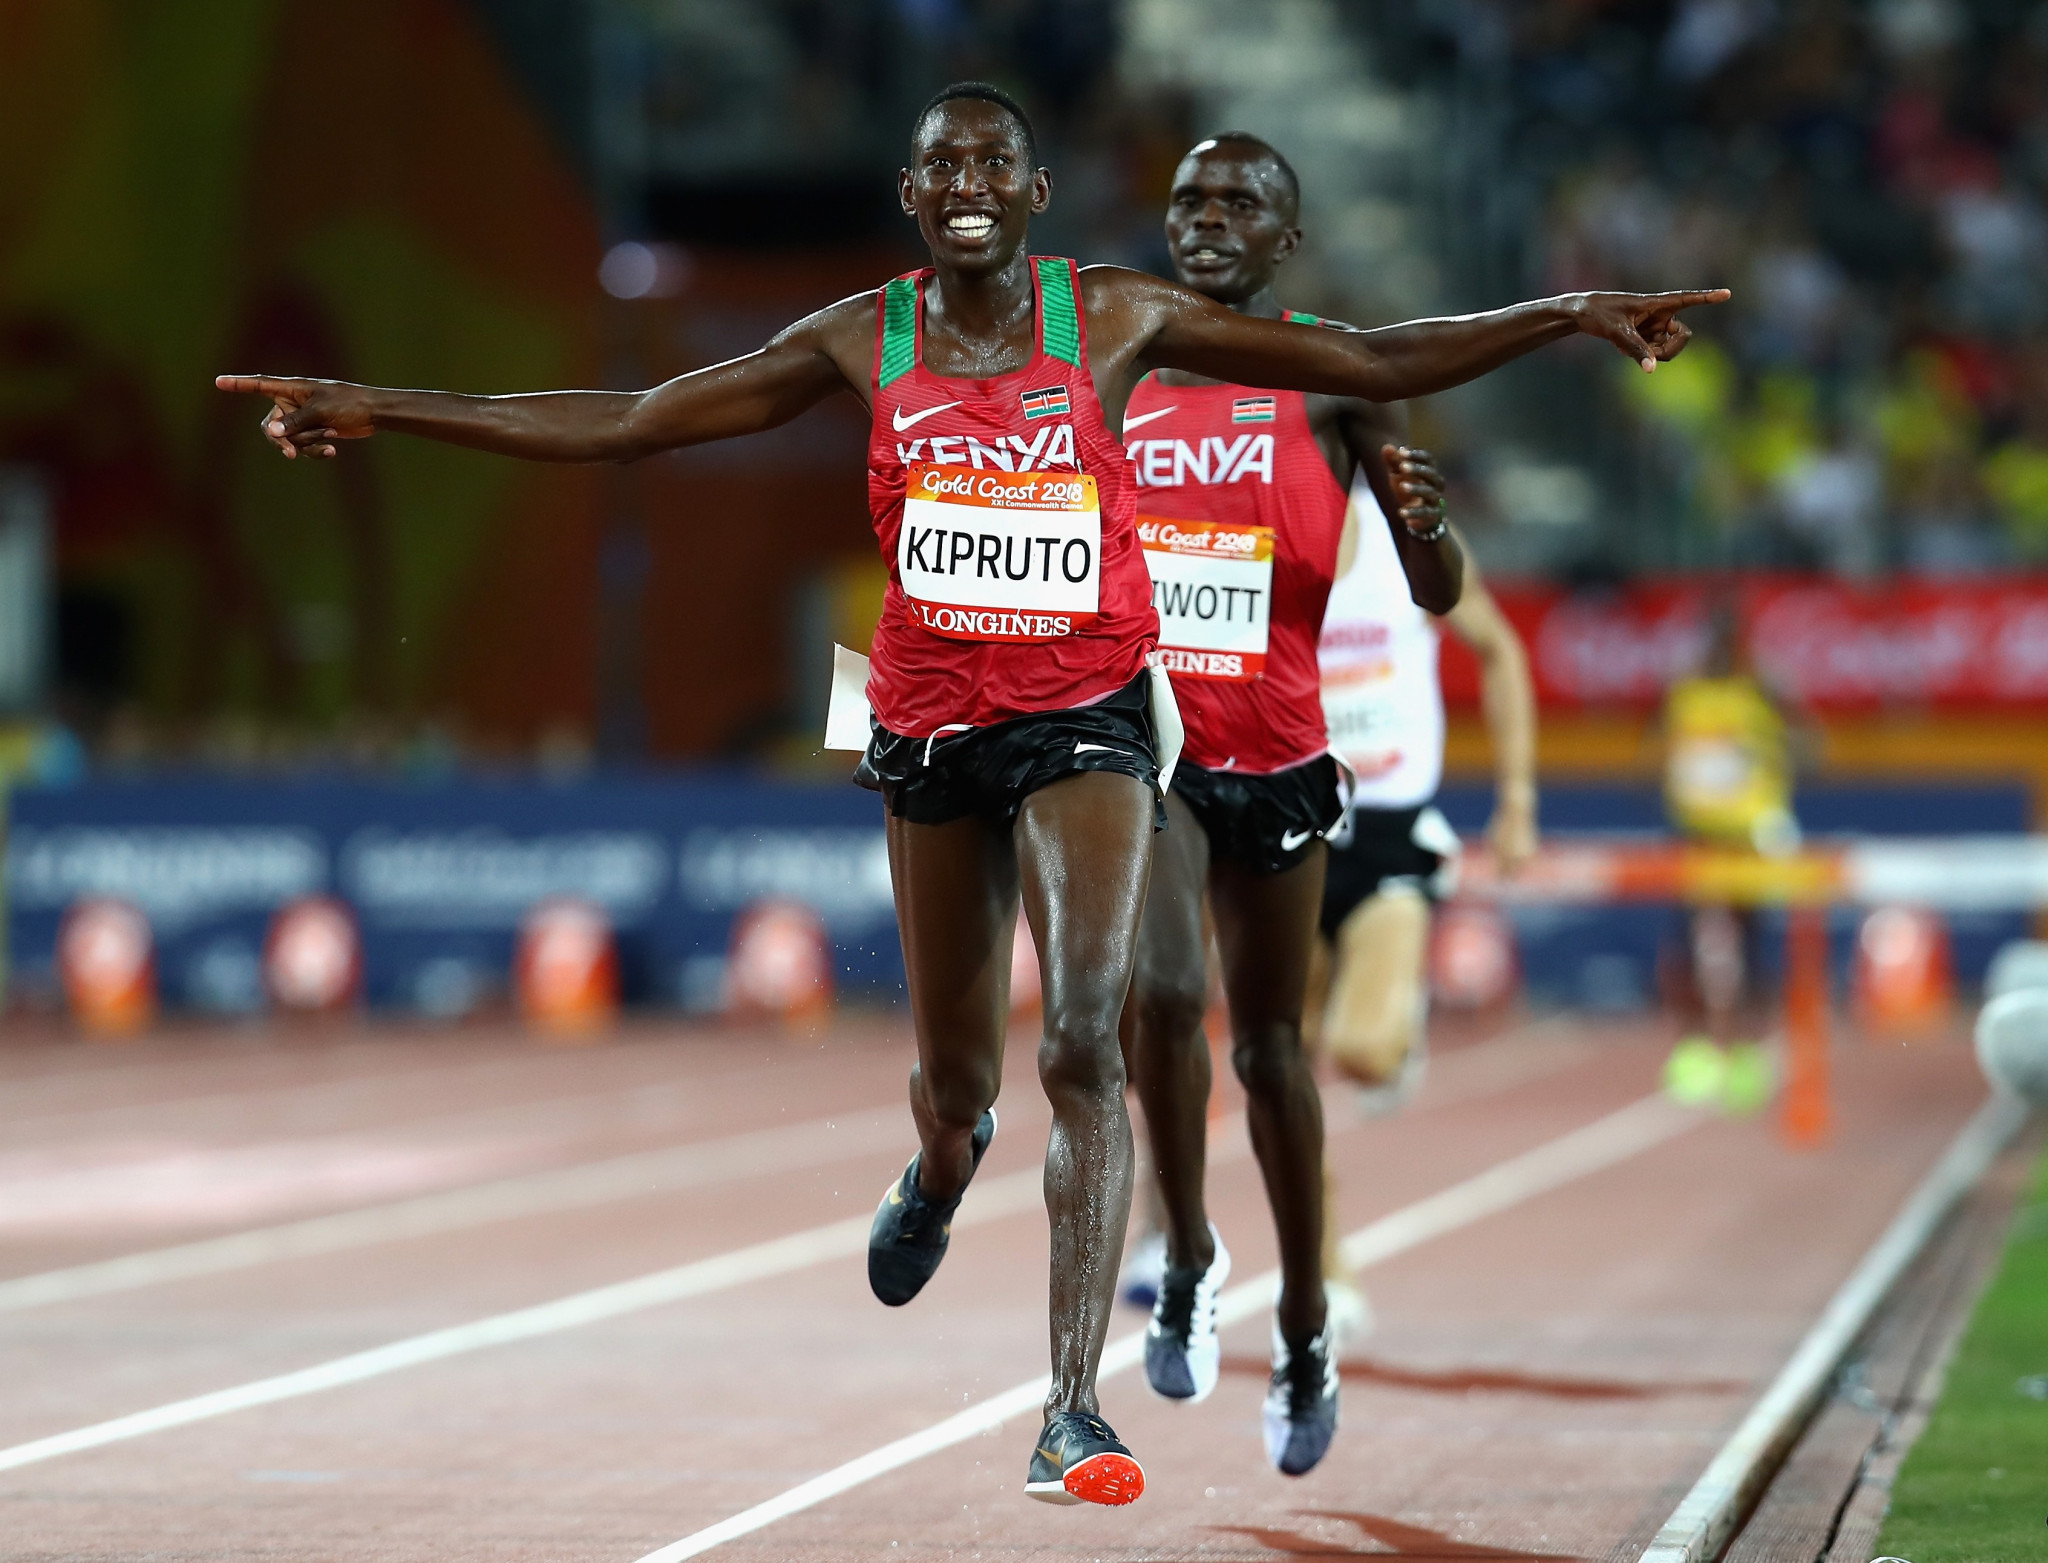 Kenya’s Olympic 3,000m steeplechase champion Kipruto out of Monaco meeting after positive COVID-19 test